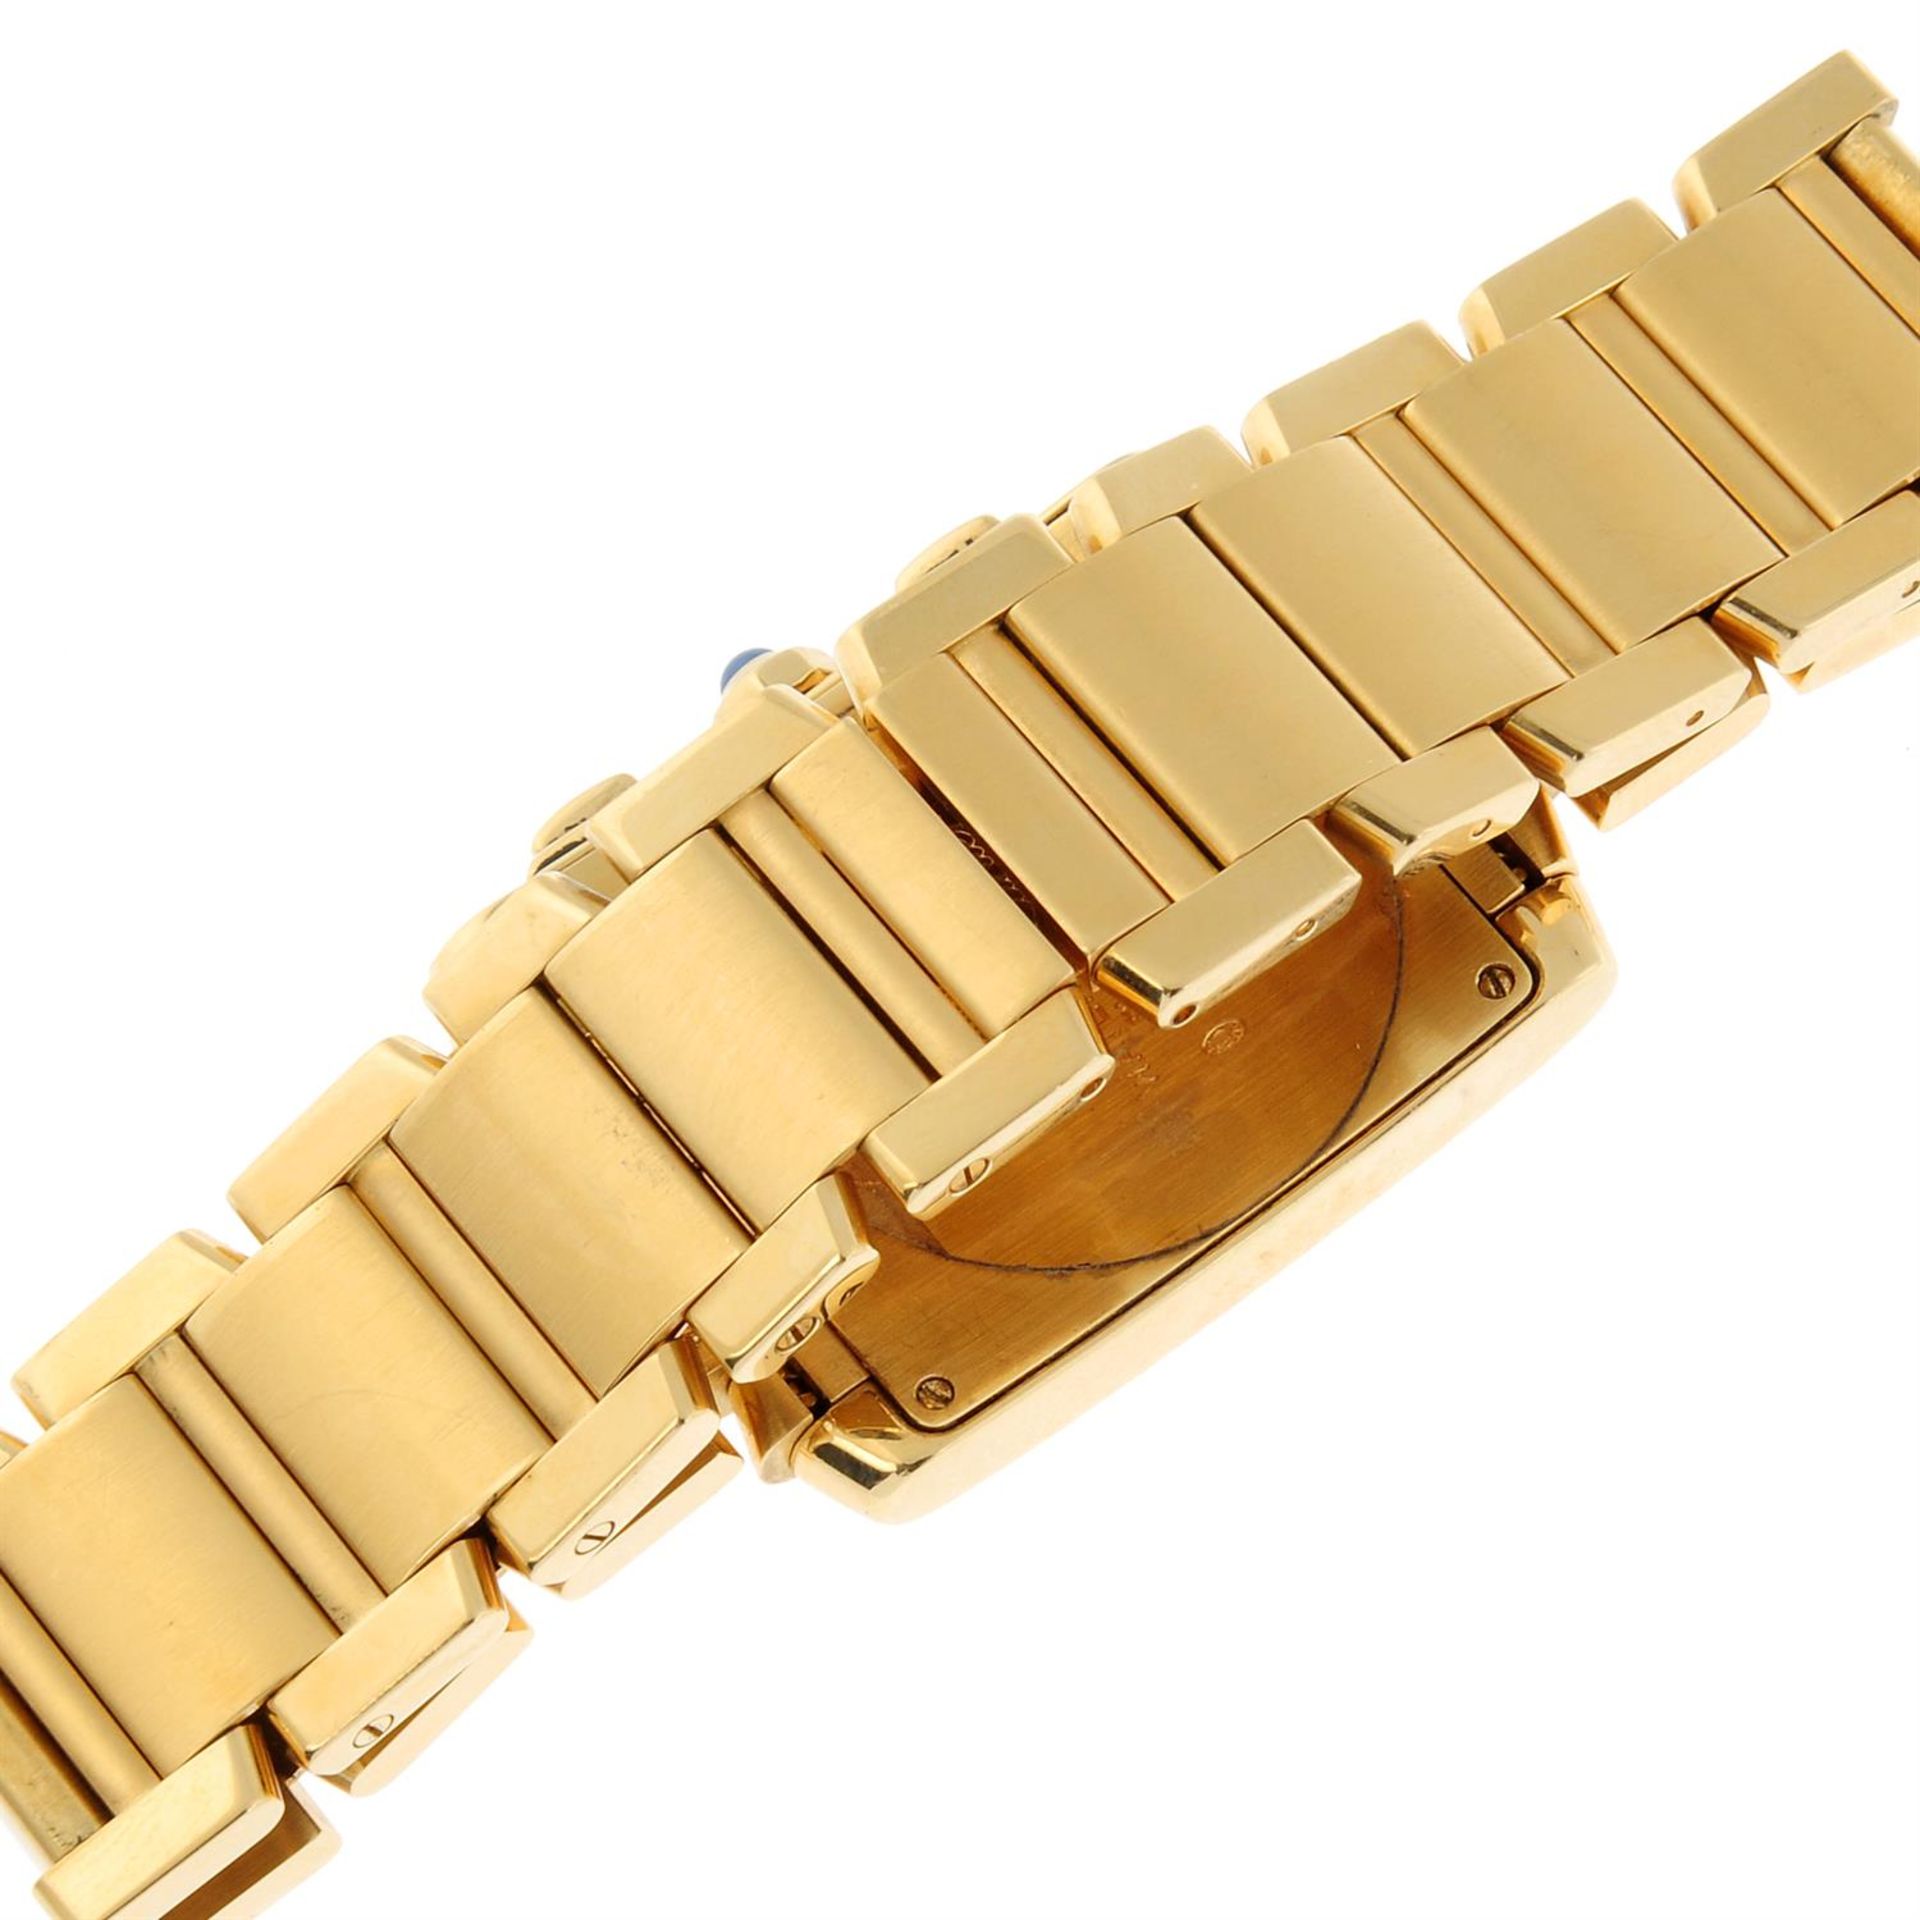 CARTIER - an 18ct yellow gold Tank Francaise chronograph bracelet watch, 28mm. - Image 2 of 6